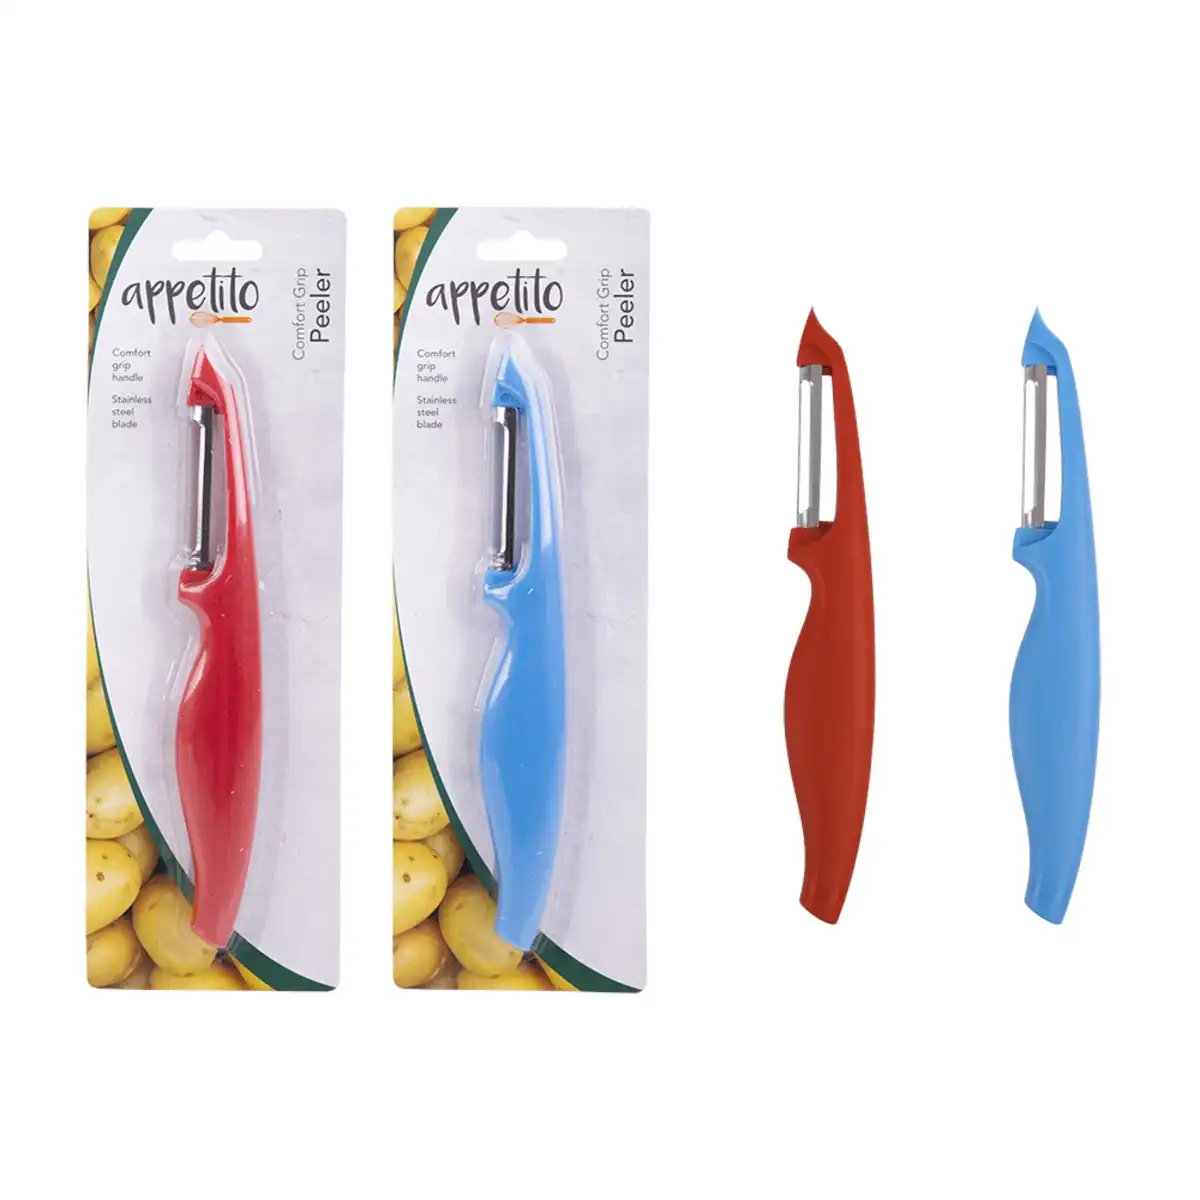 Appetito Comfort Grip Peeler   Assorted Colours